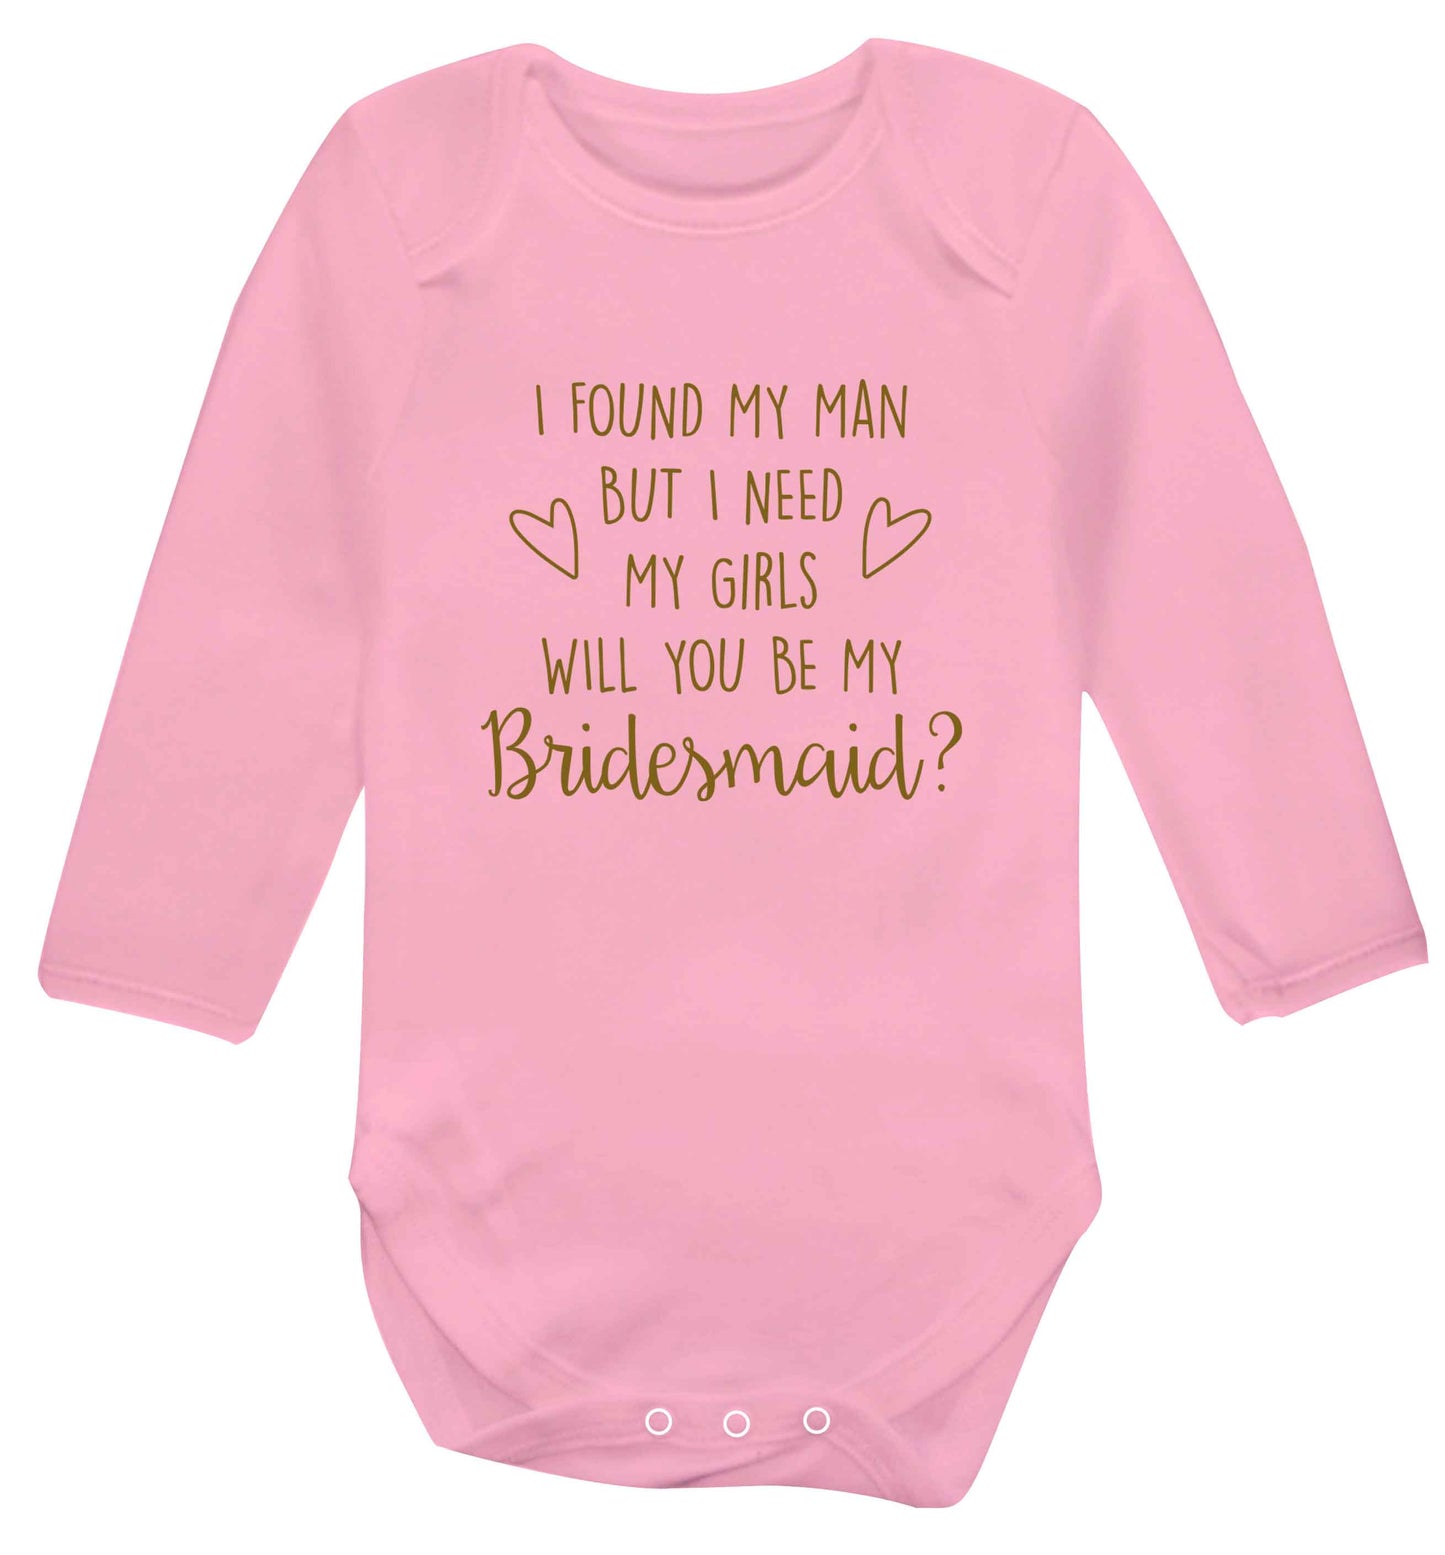 I found my man but I need my girls will you be my bridesmaid? baby vest long sleeved pale pink 6-12 months